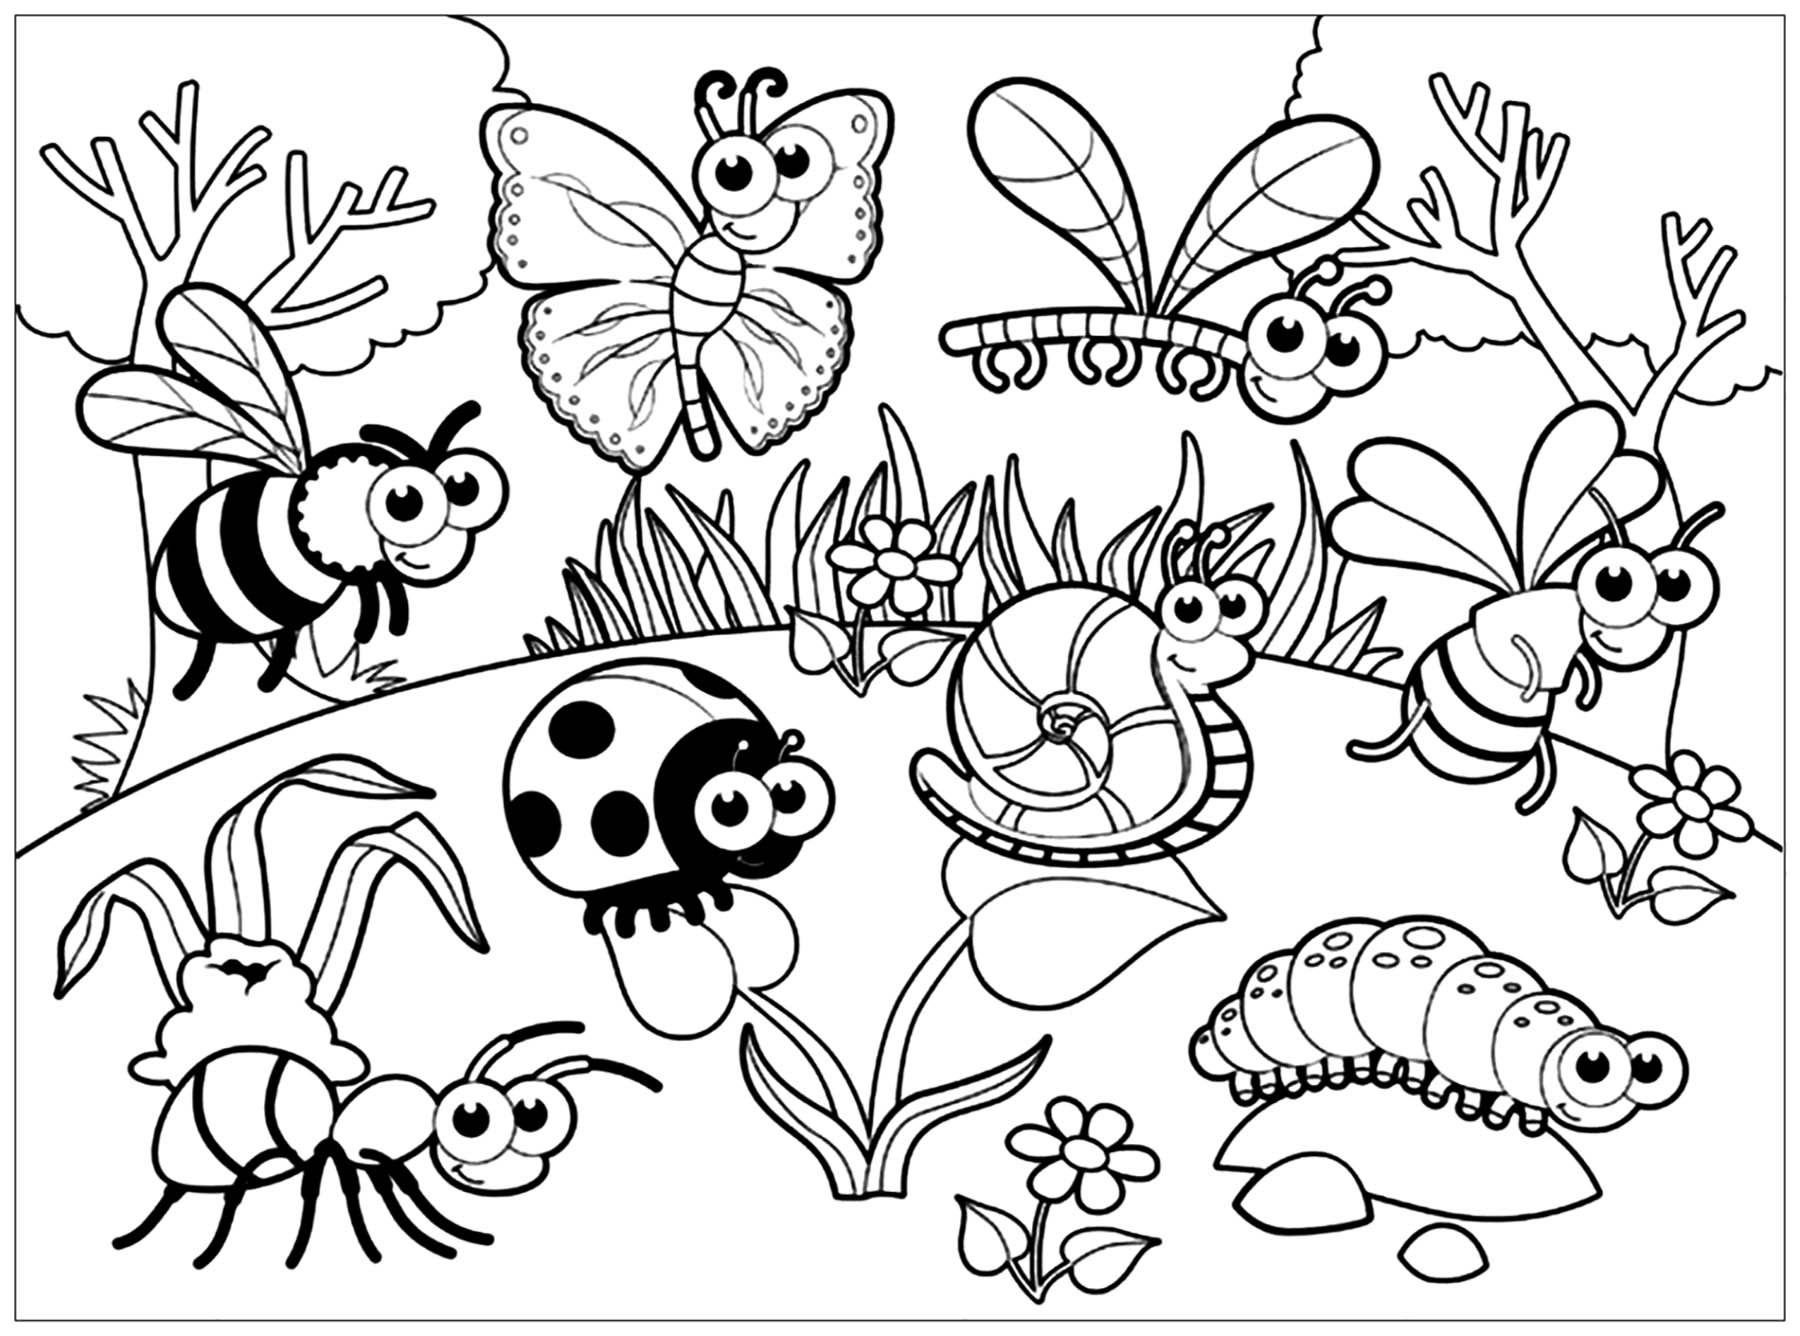 Meeting Insects Kids Coloring Pages